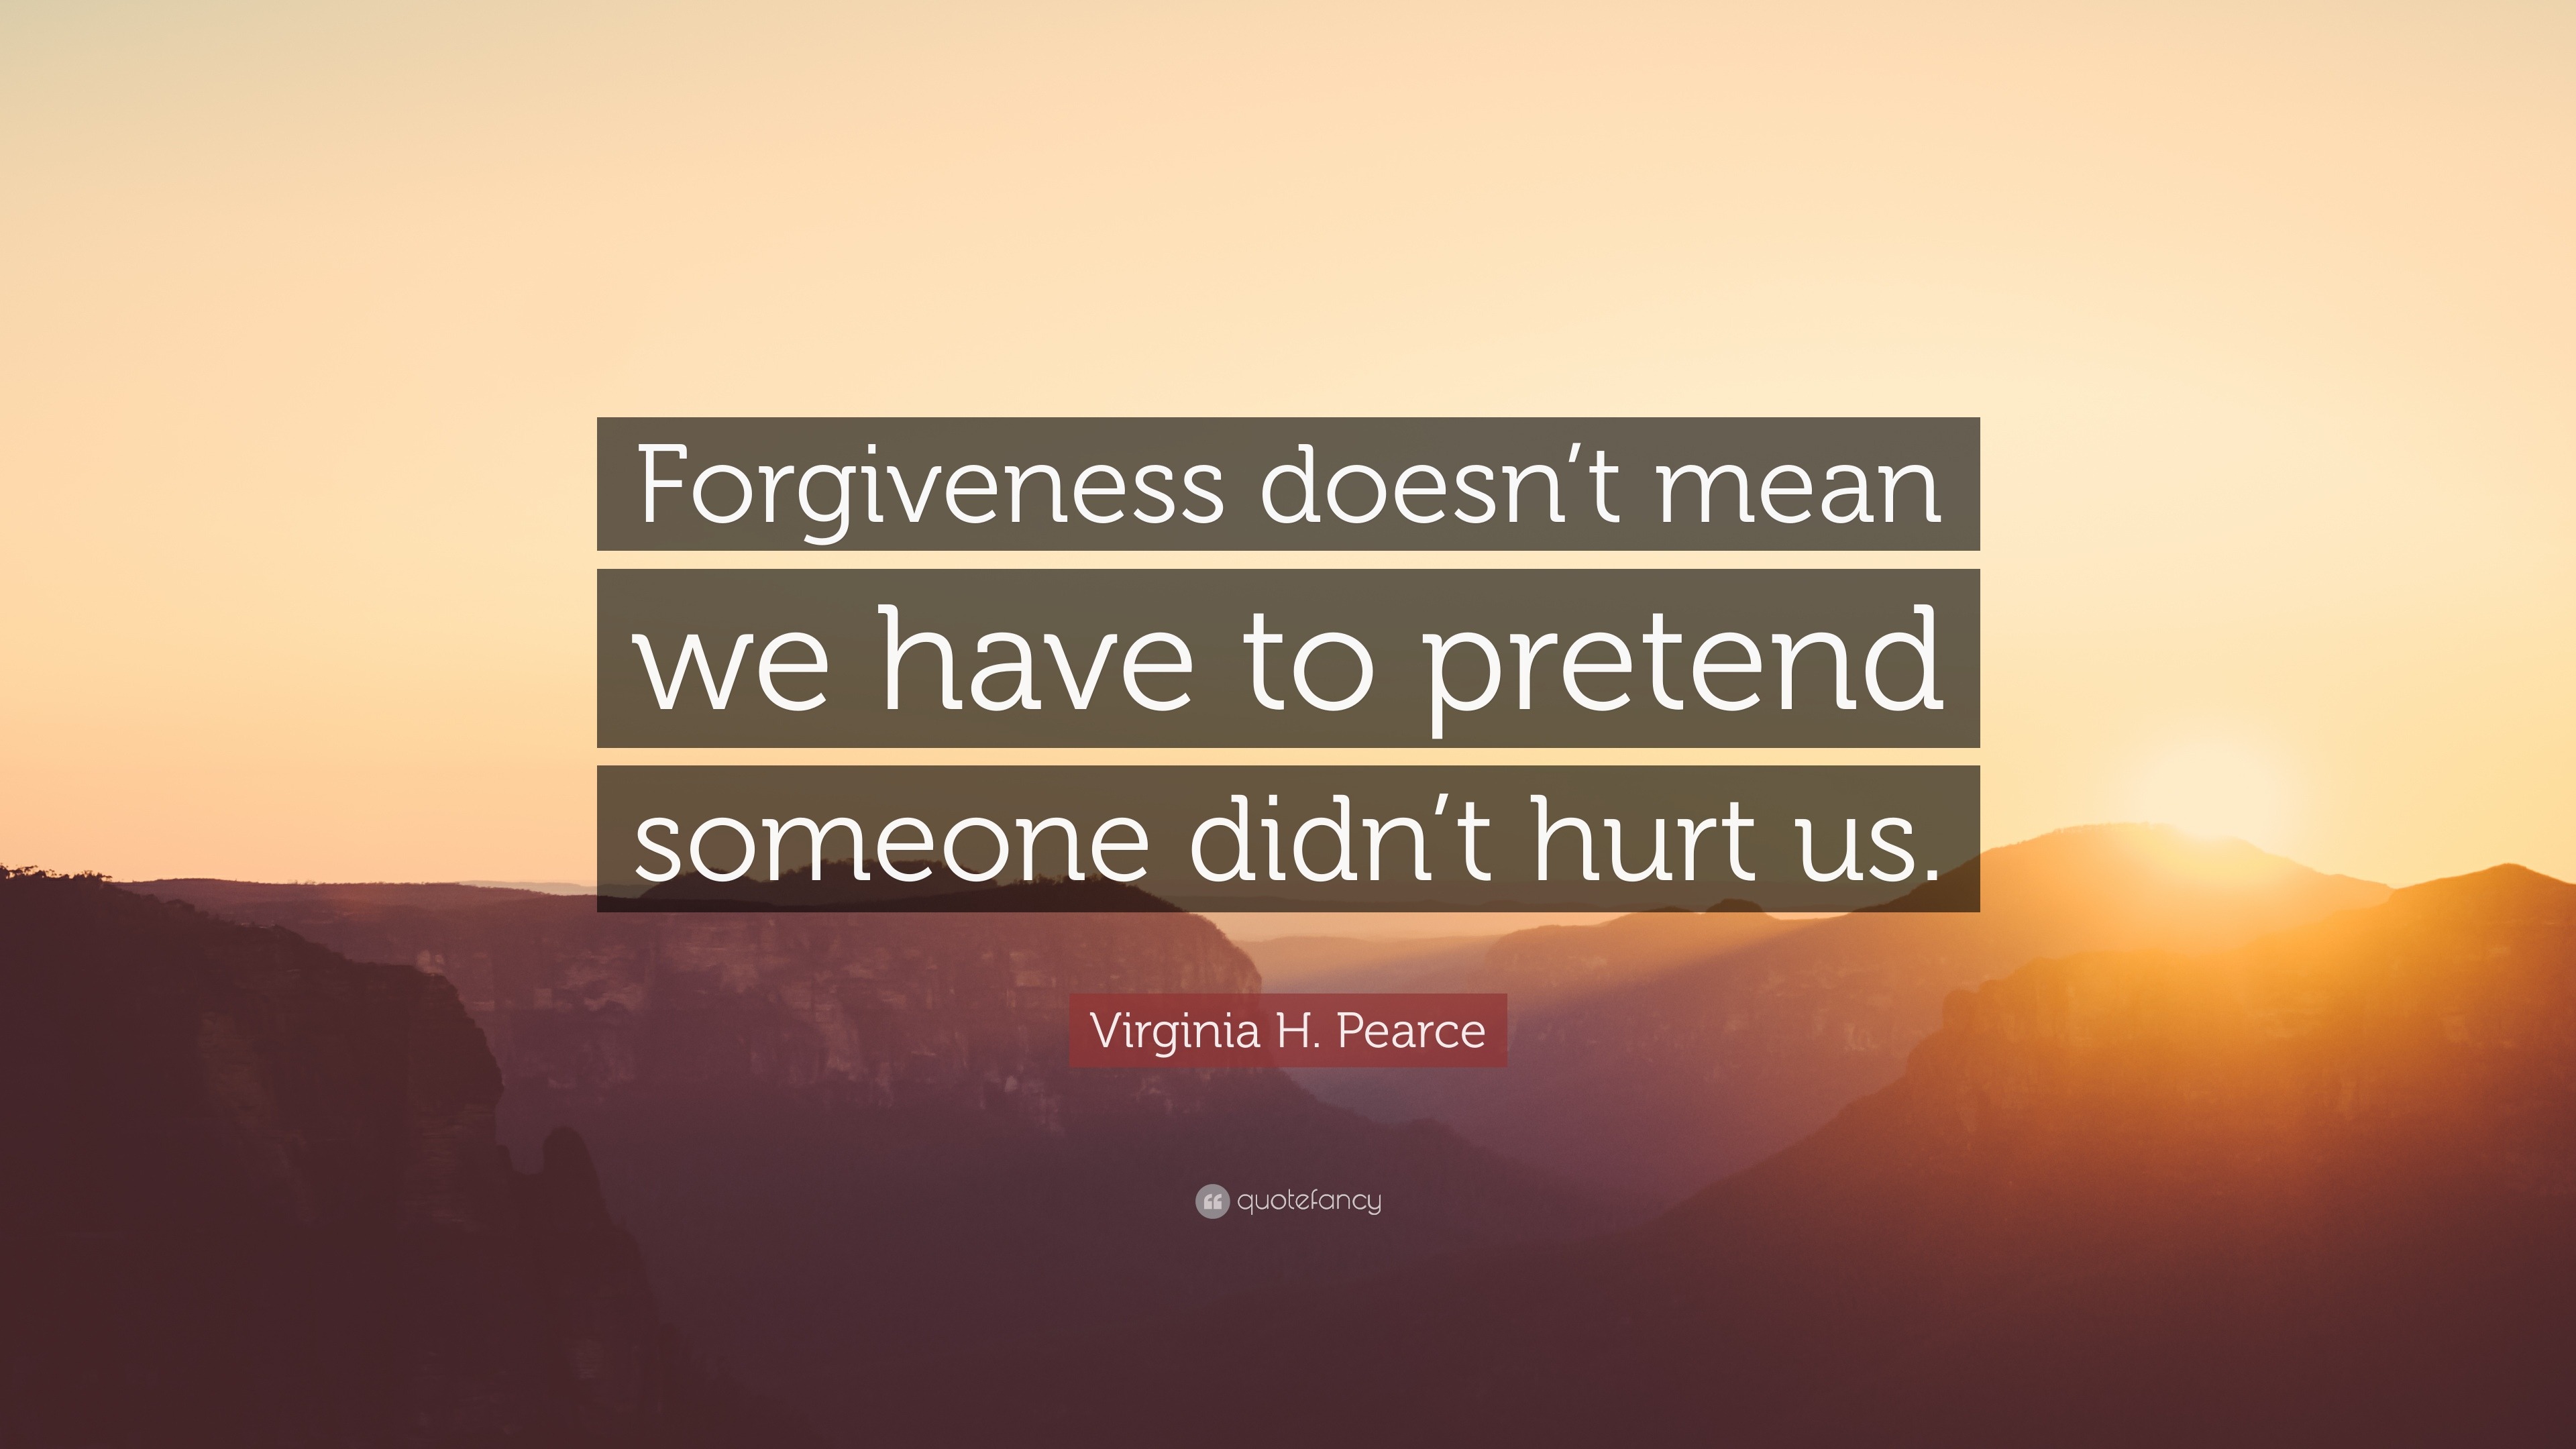 Virginia H. Pearce Quote: “Forgiveness doesn’t mean we have to pretend ...